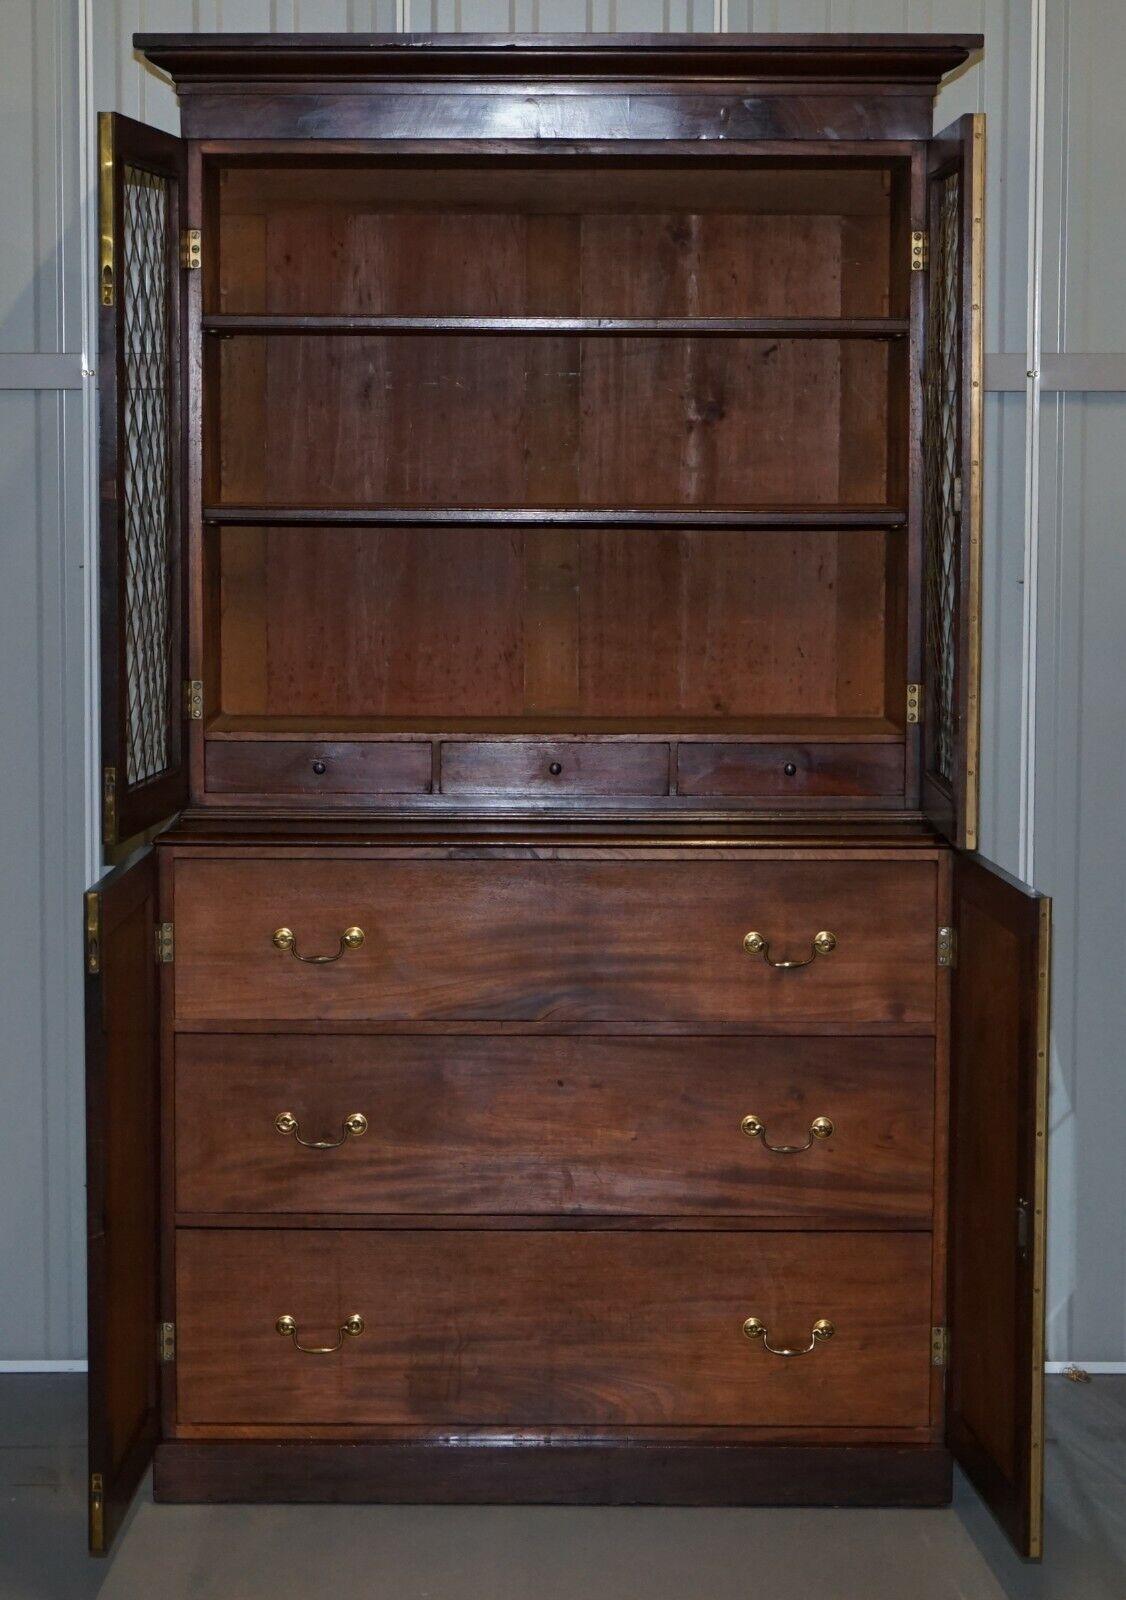 RARE 19TH CENTURY HARDWOOD PIERCED BRONZED DOOR BOOKCASE WiTH CHEST OF DRAWERS For Sale 2